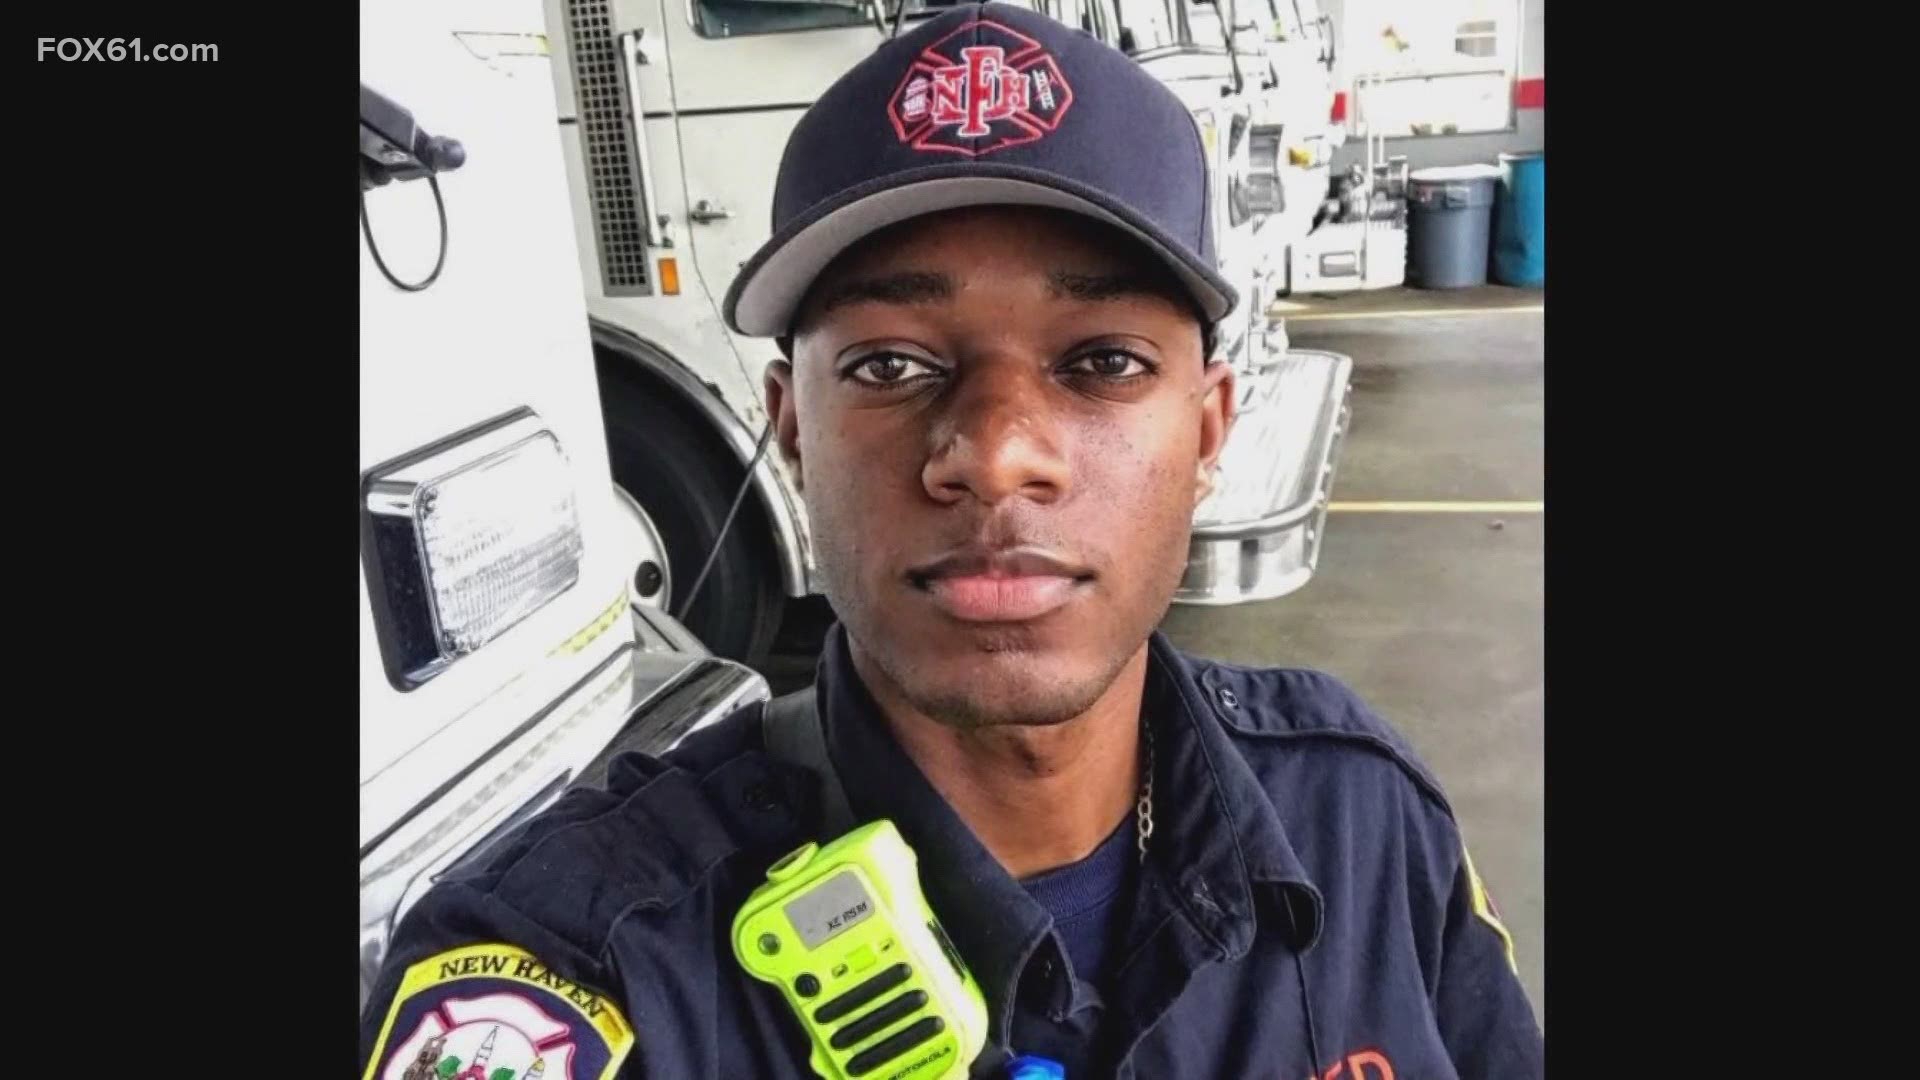 Lt. Samod Rankins was placed in the hospital after being injured battling a house fire. Ricardo Torres, another firefighter at the scene, lost his life.